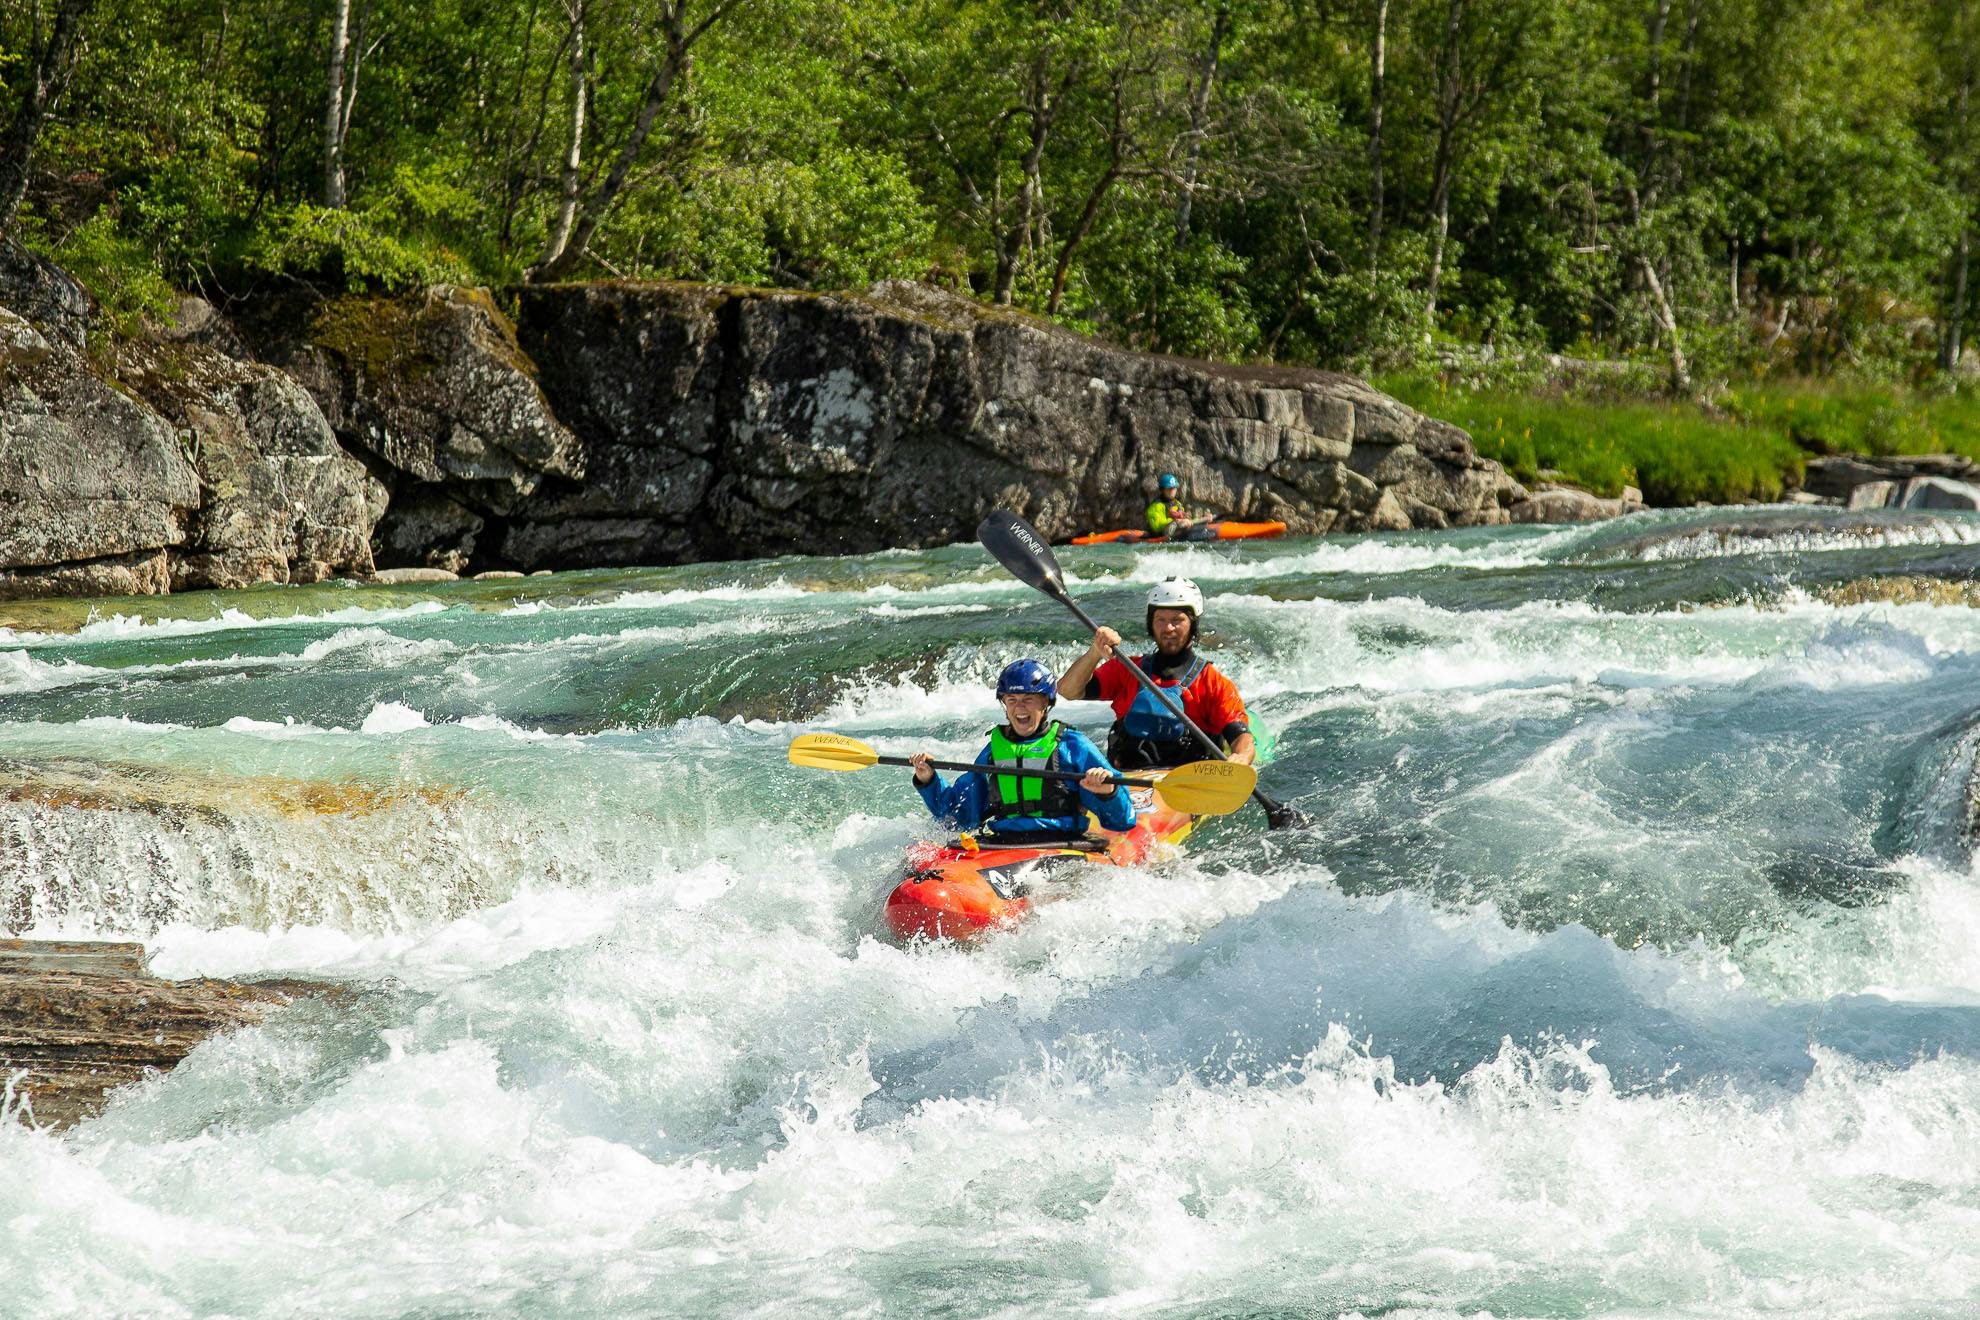 Tandem kayak experience on a whitewater river